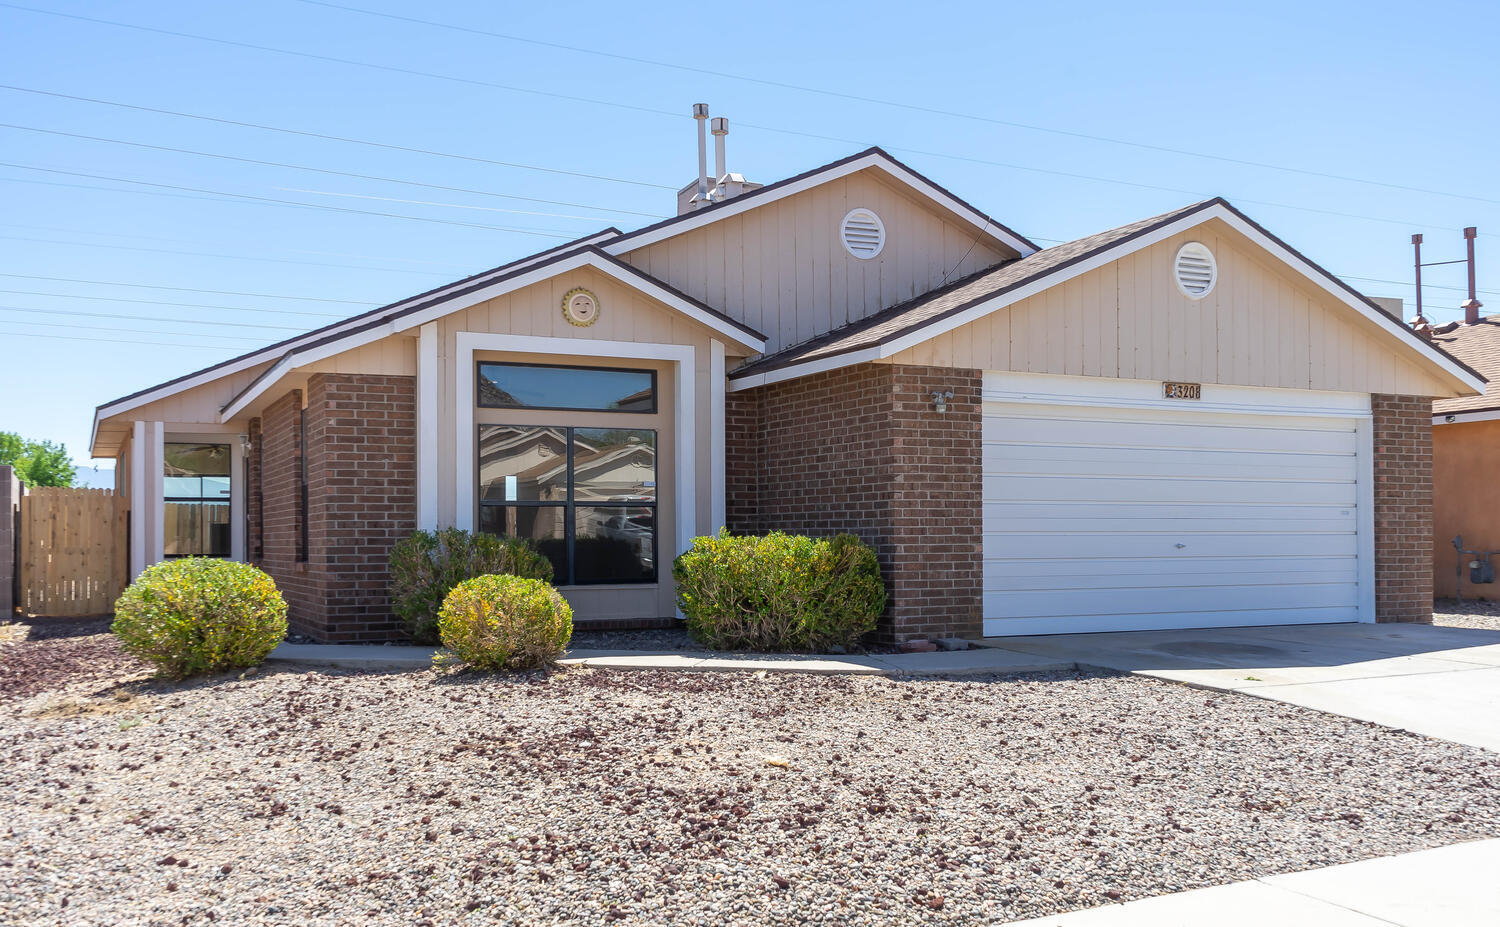 3208 PAINTED ROCK DRIVE NW, ALBUQUERQUE, NM 87120 